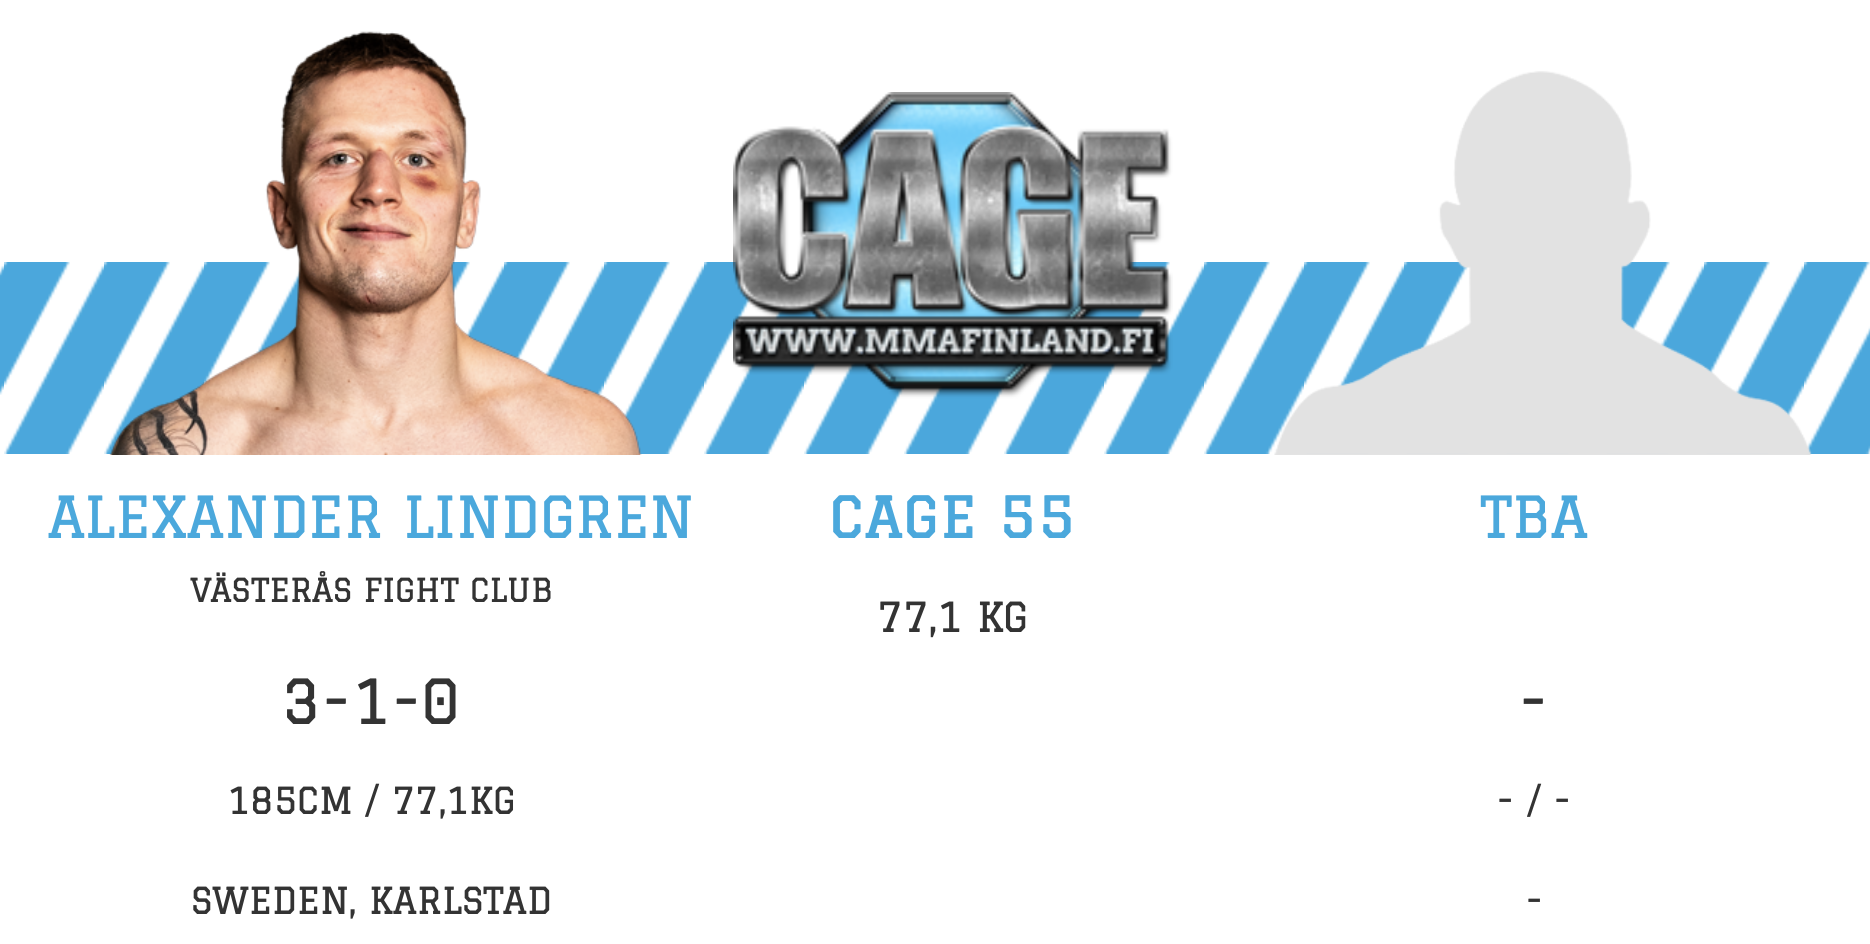 Cage 54 MMA Finland Oy